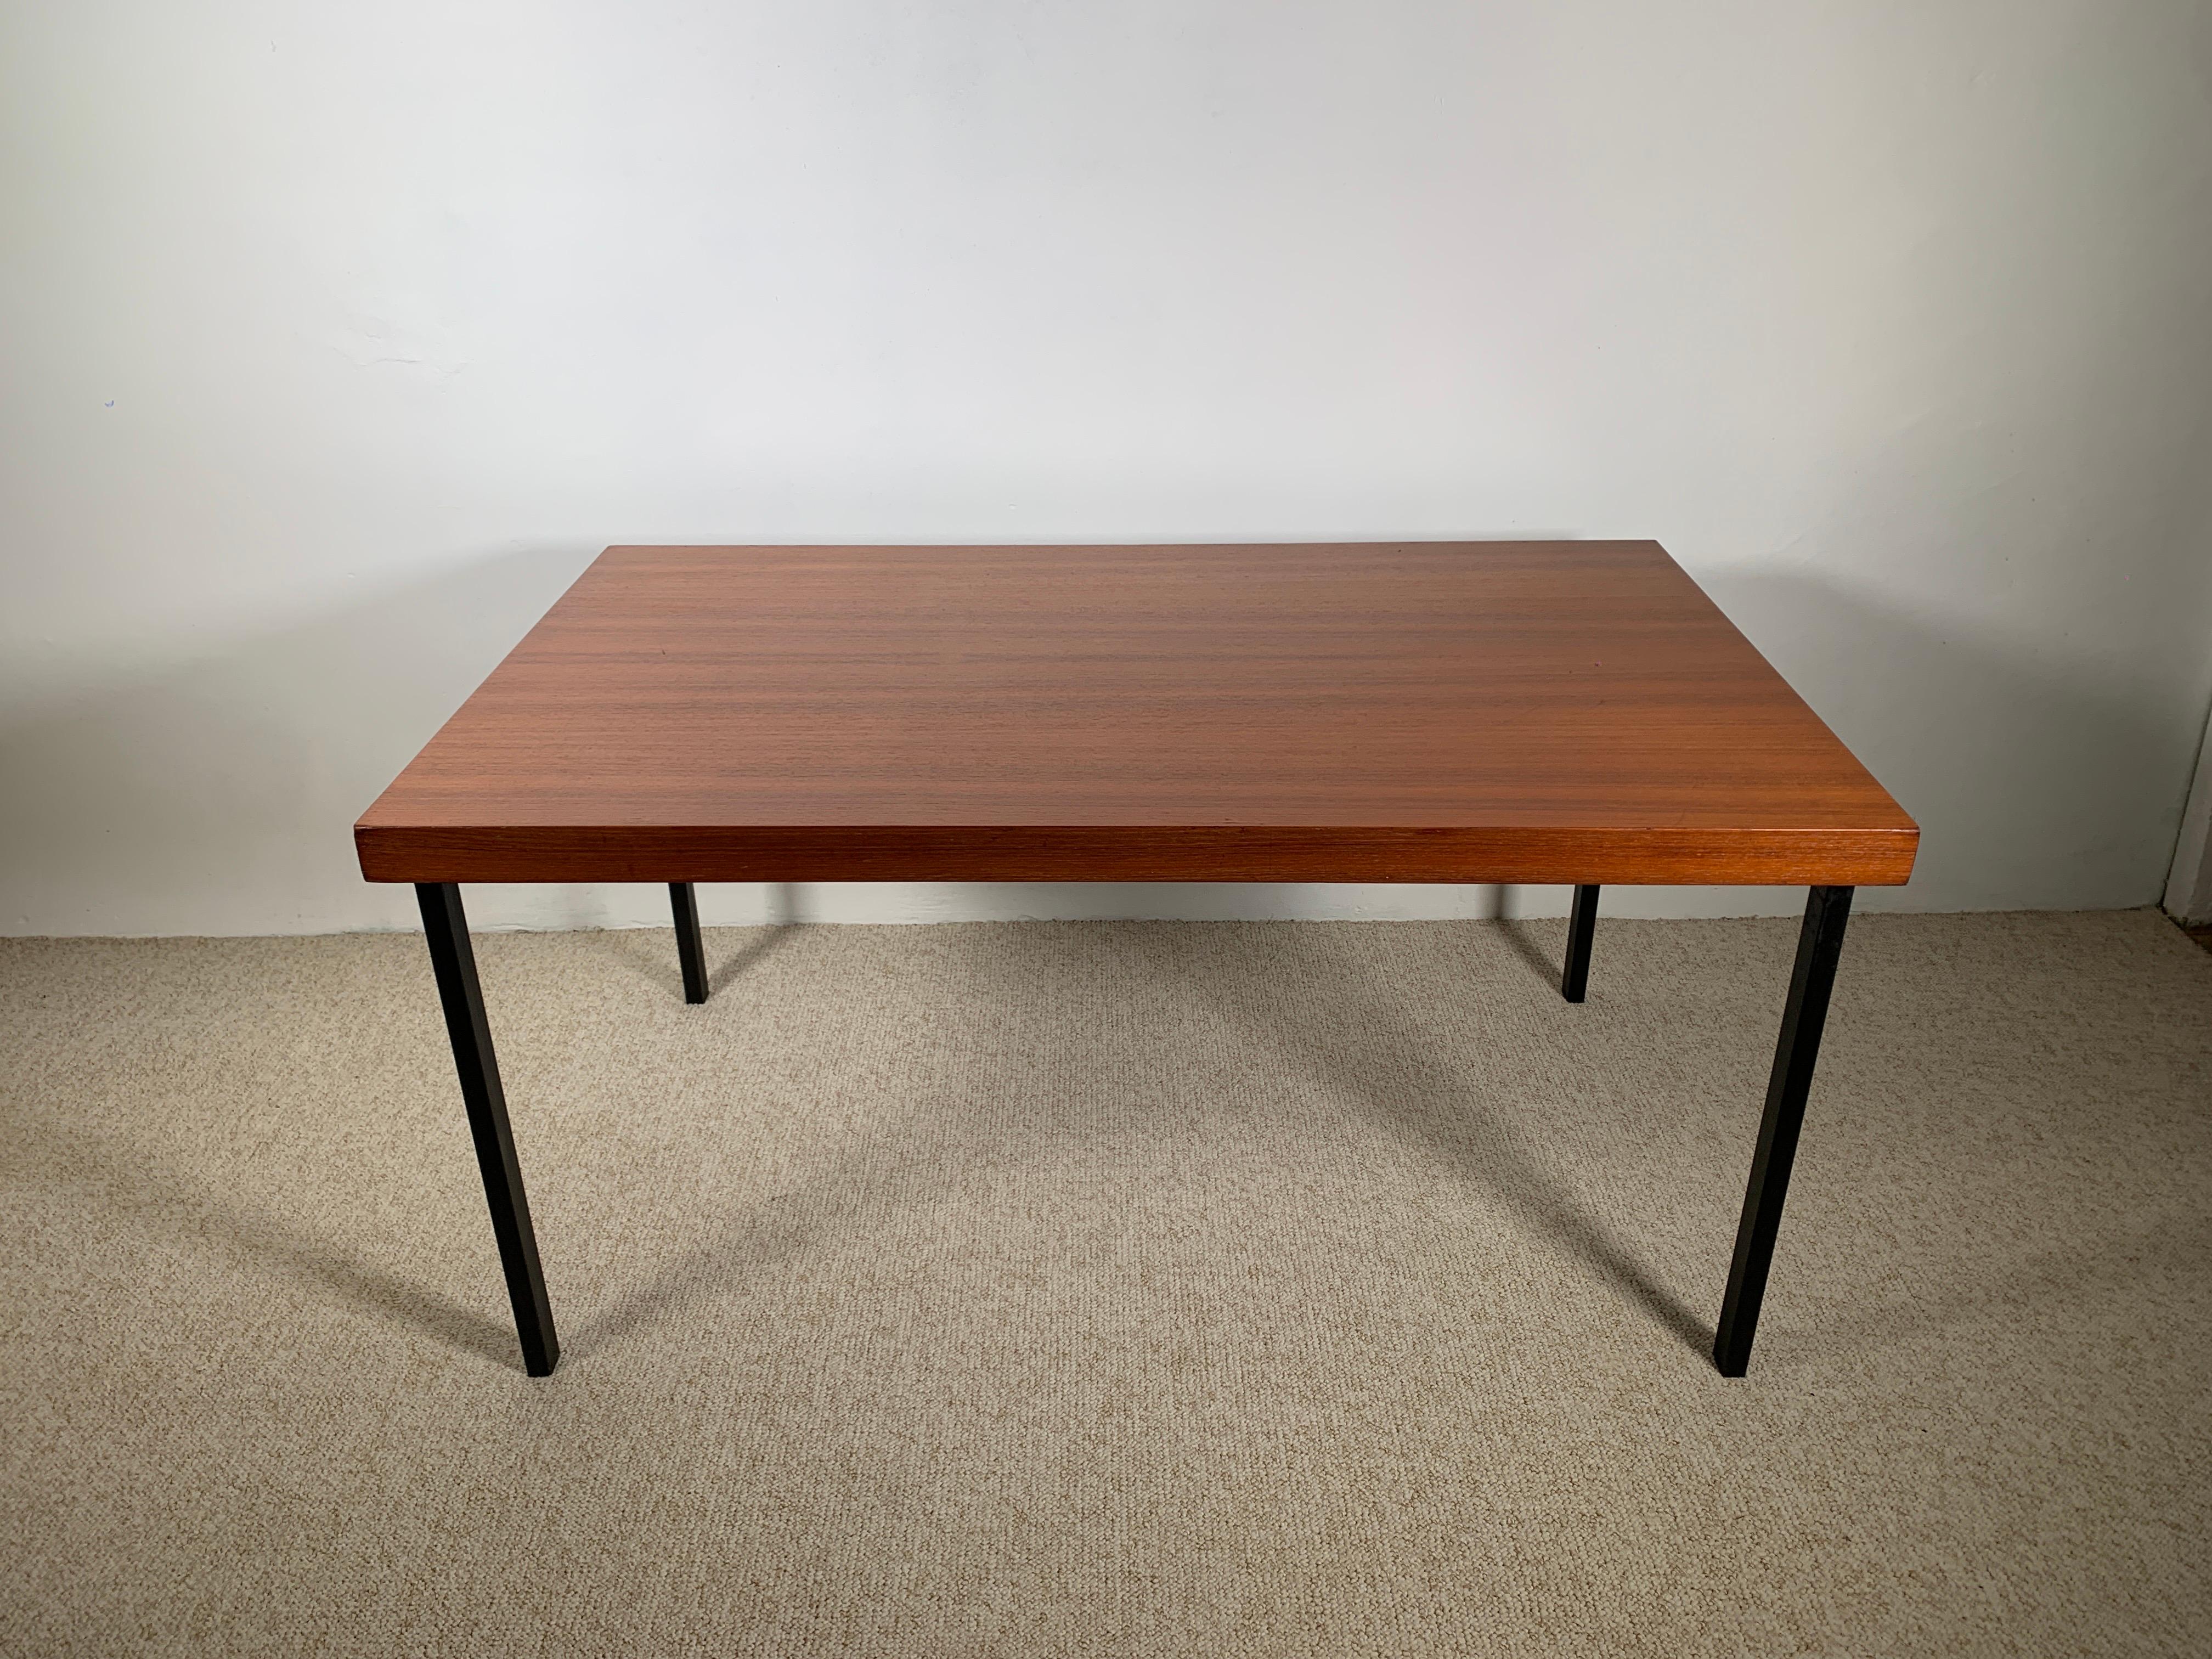 Rare table ARP Atelier de Recherches Plastiques (Pierre Guariche, Michel Mortier, Joseph André Motte), Minimalist, with extensions.

Tray in very good original condition.
Some discreet scratches on the extensions and lacquering.